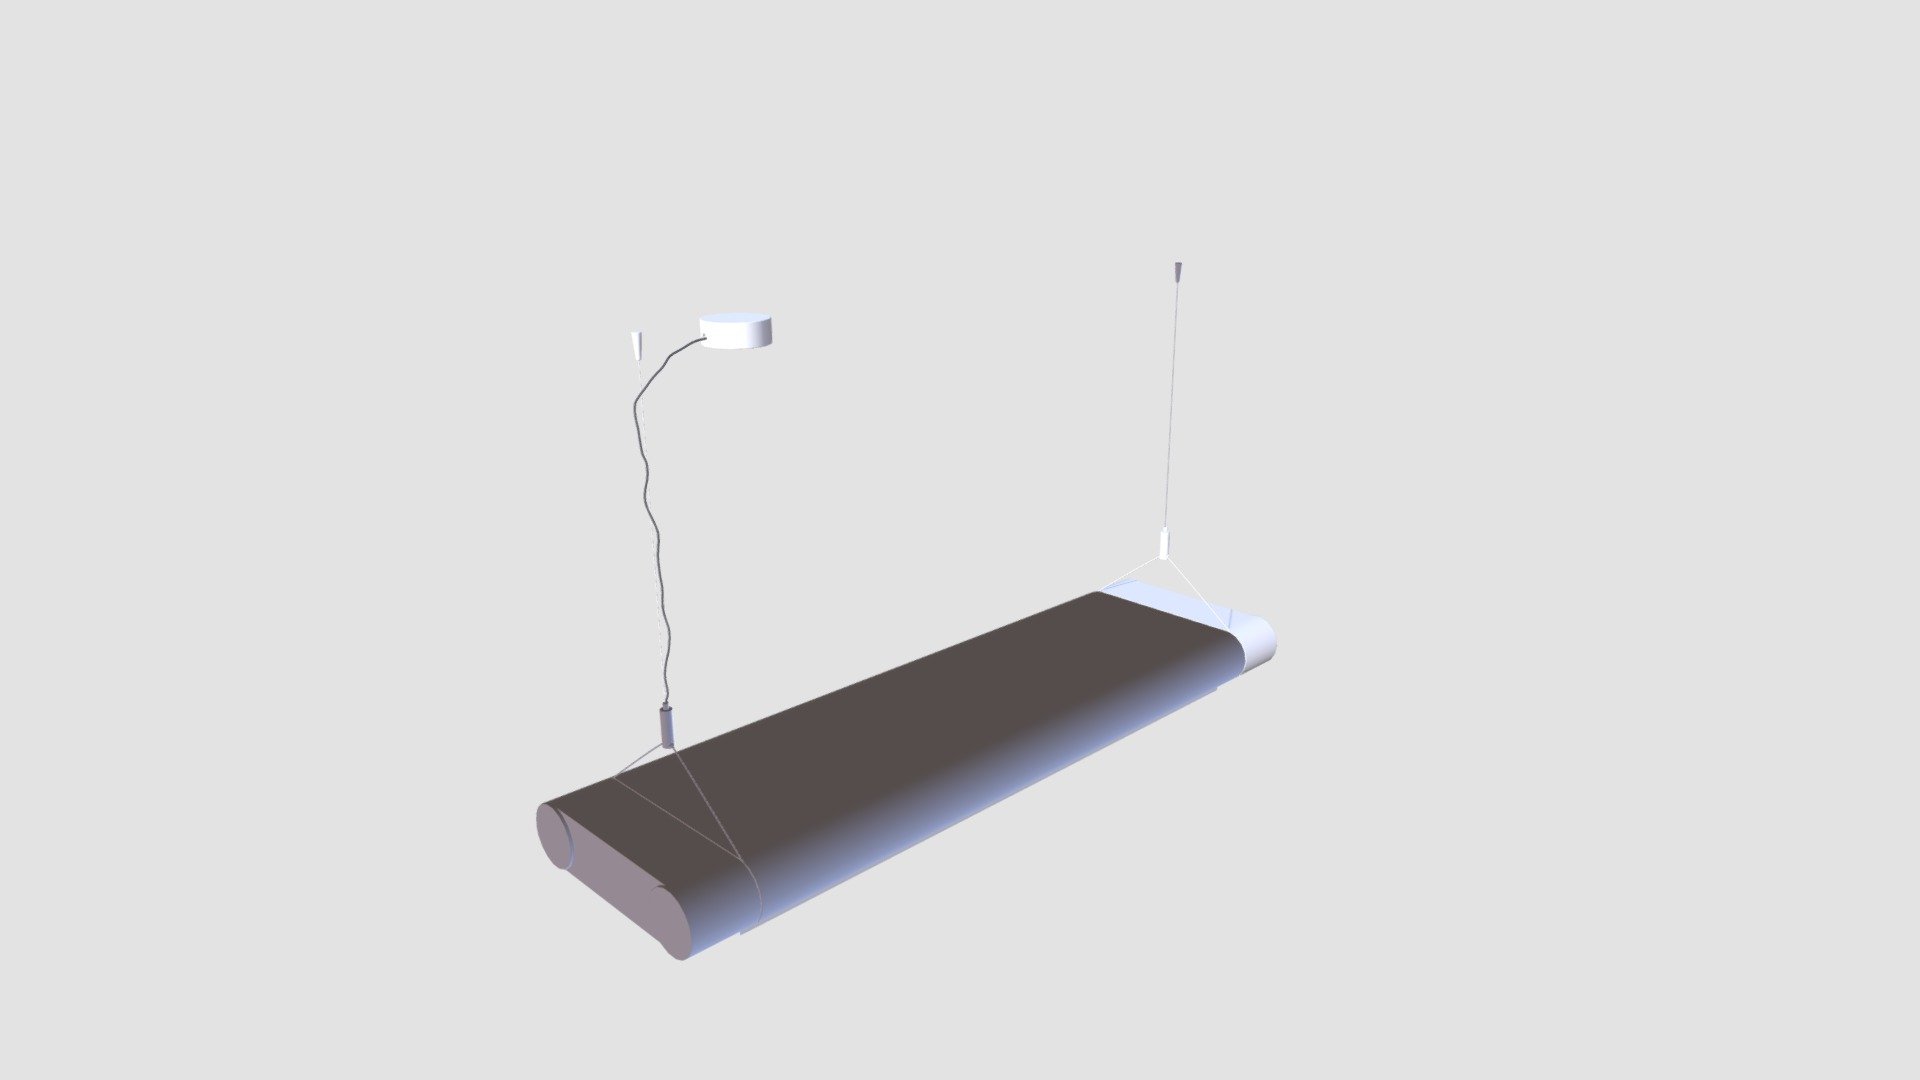 Lamp Buy Royalty Free 3d Model By Evermotion 0737388 Sketchfab Store 4299